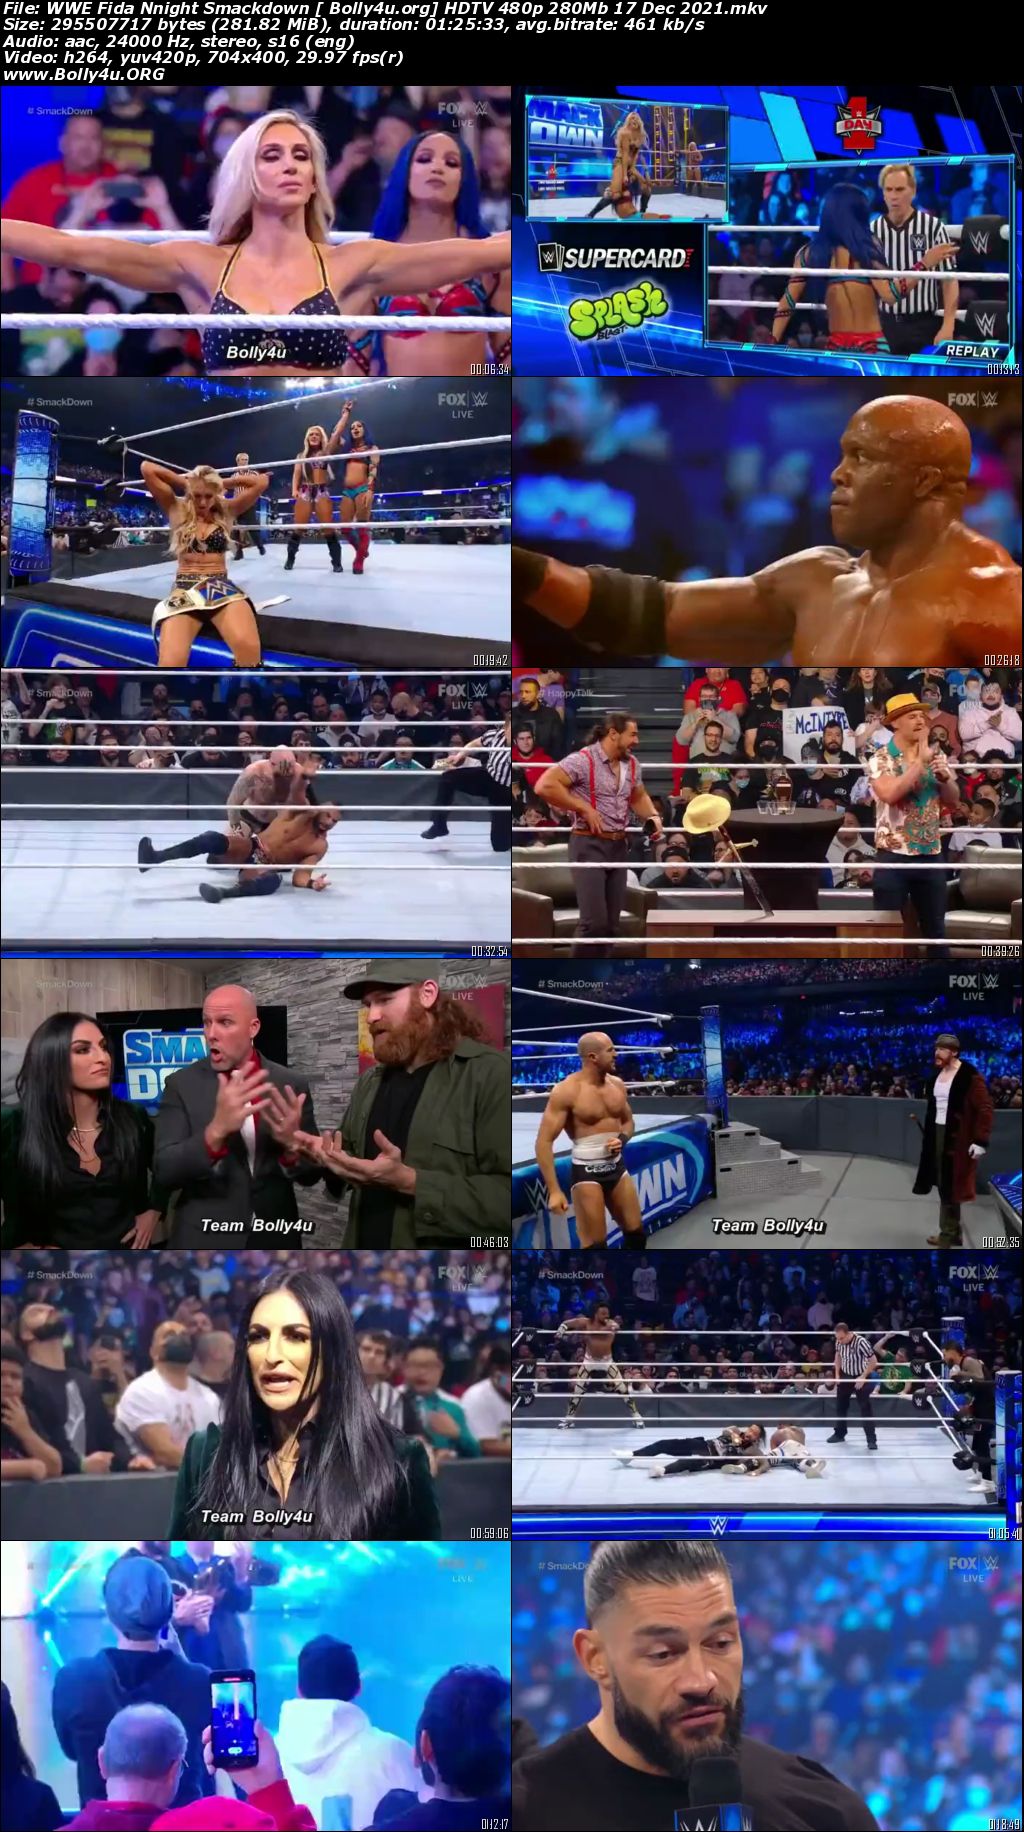 WWE Friday Night Smackdown HDTV 480p 280Mb 17 Dec 2021 Download